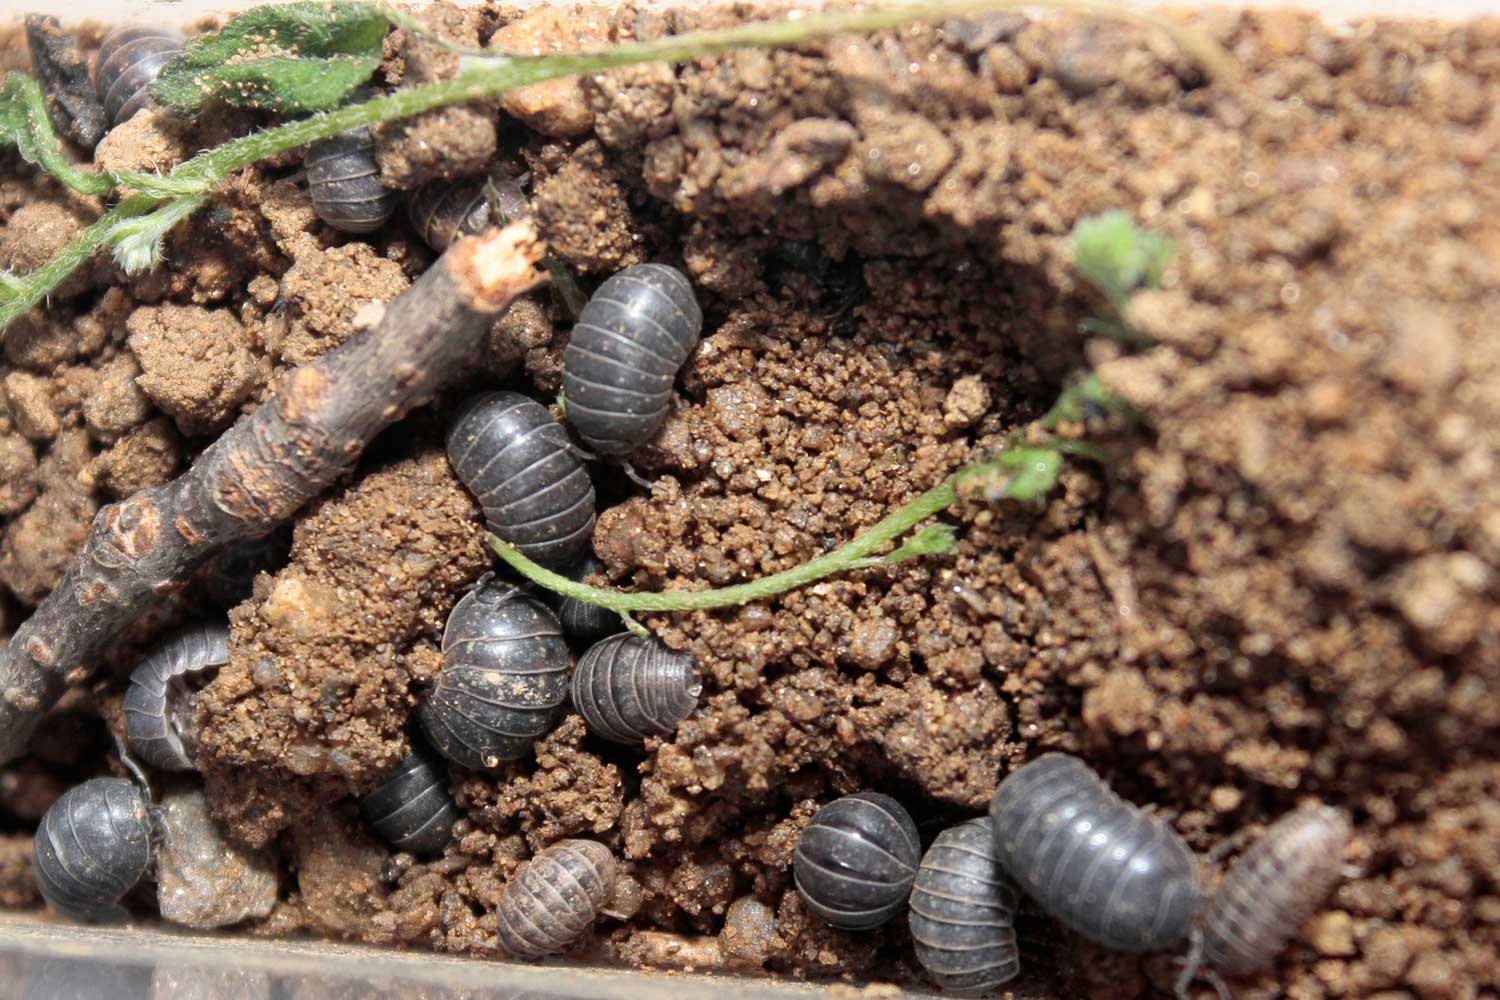 Roly-polies in the soil.